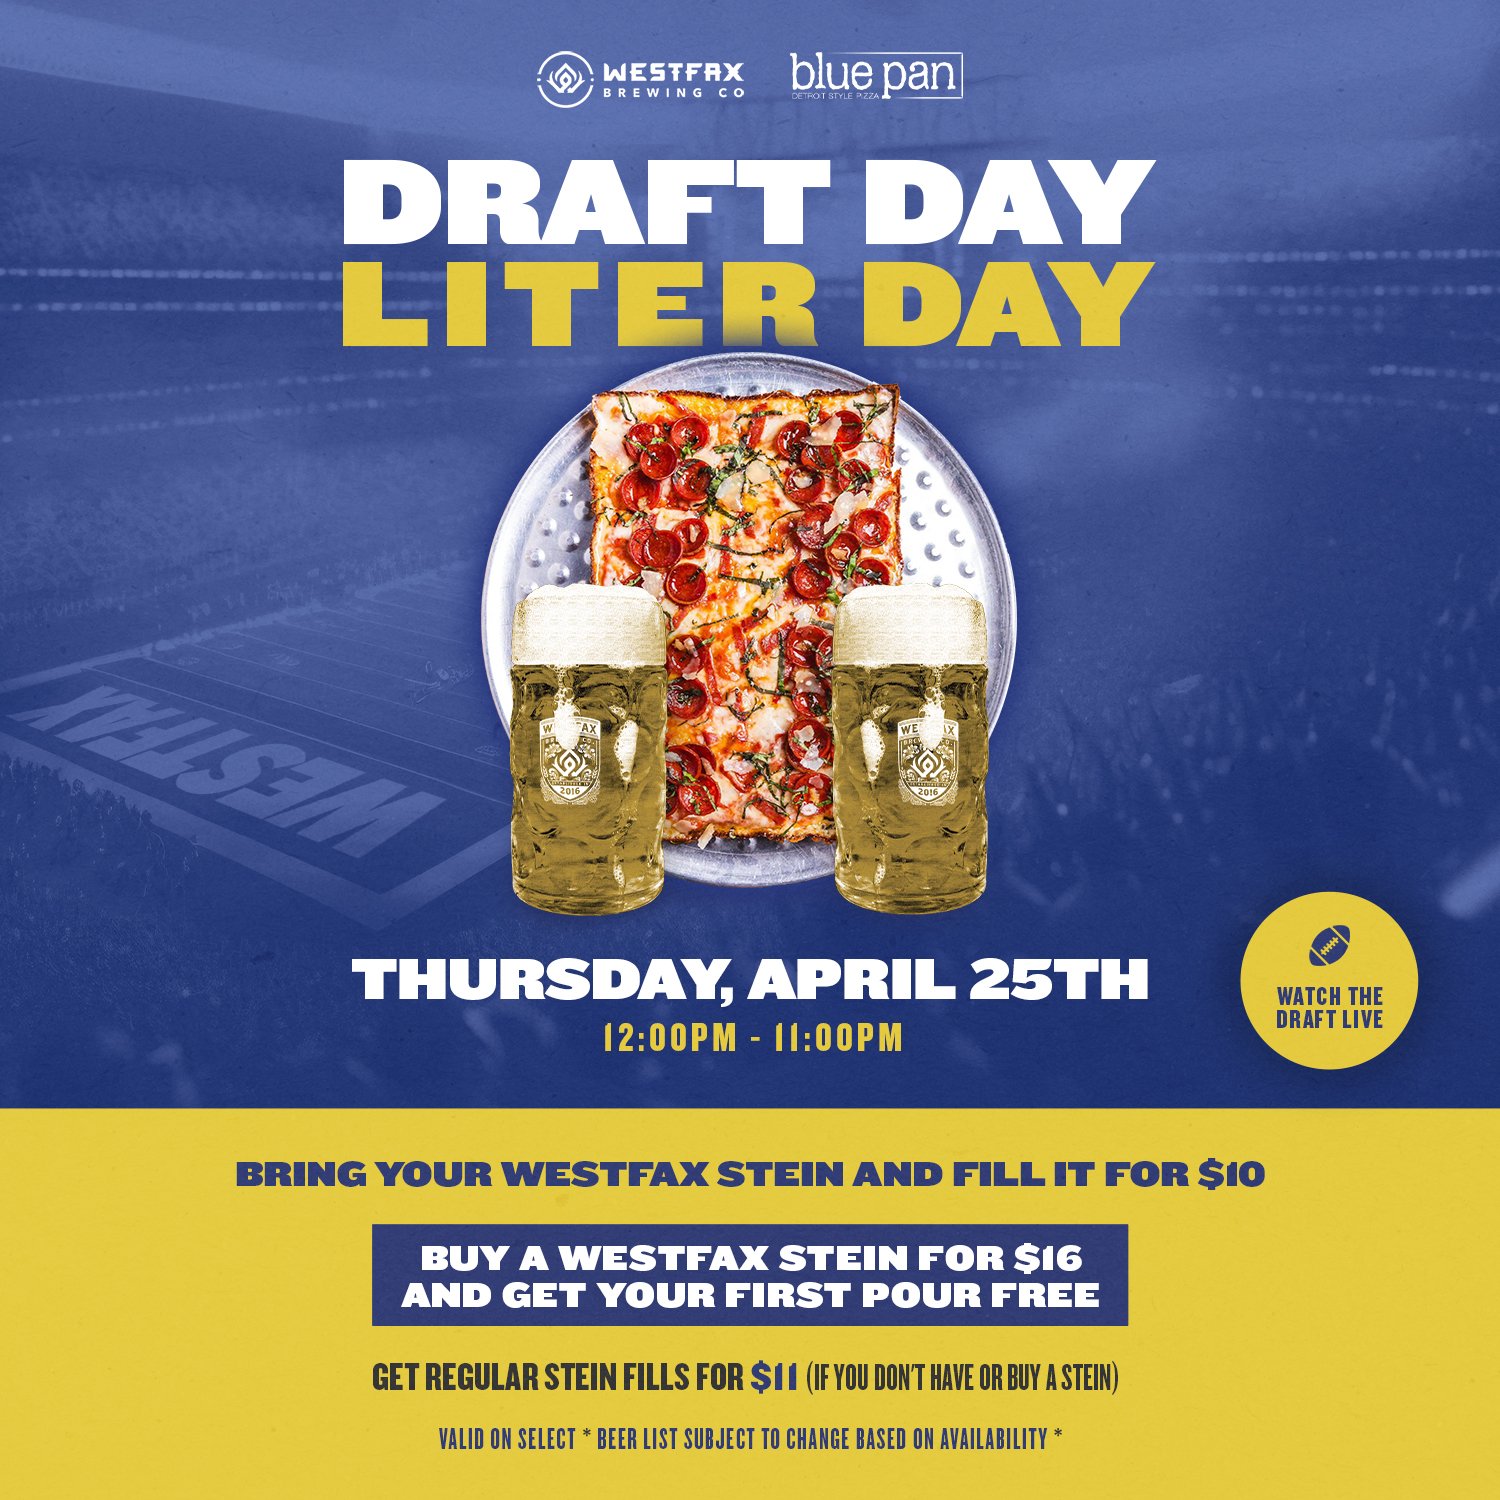 The Draft kicks off on Thursday, April 25th, and we're your ultimate viewing party destination! We'll be showing the draft and open from 12-11 PM, with $10 stein fills for those who bring their WestFax stein. 🍺

Don't have a stein? No sweat! Get you